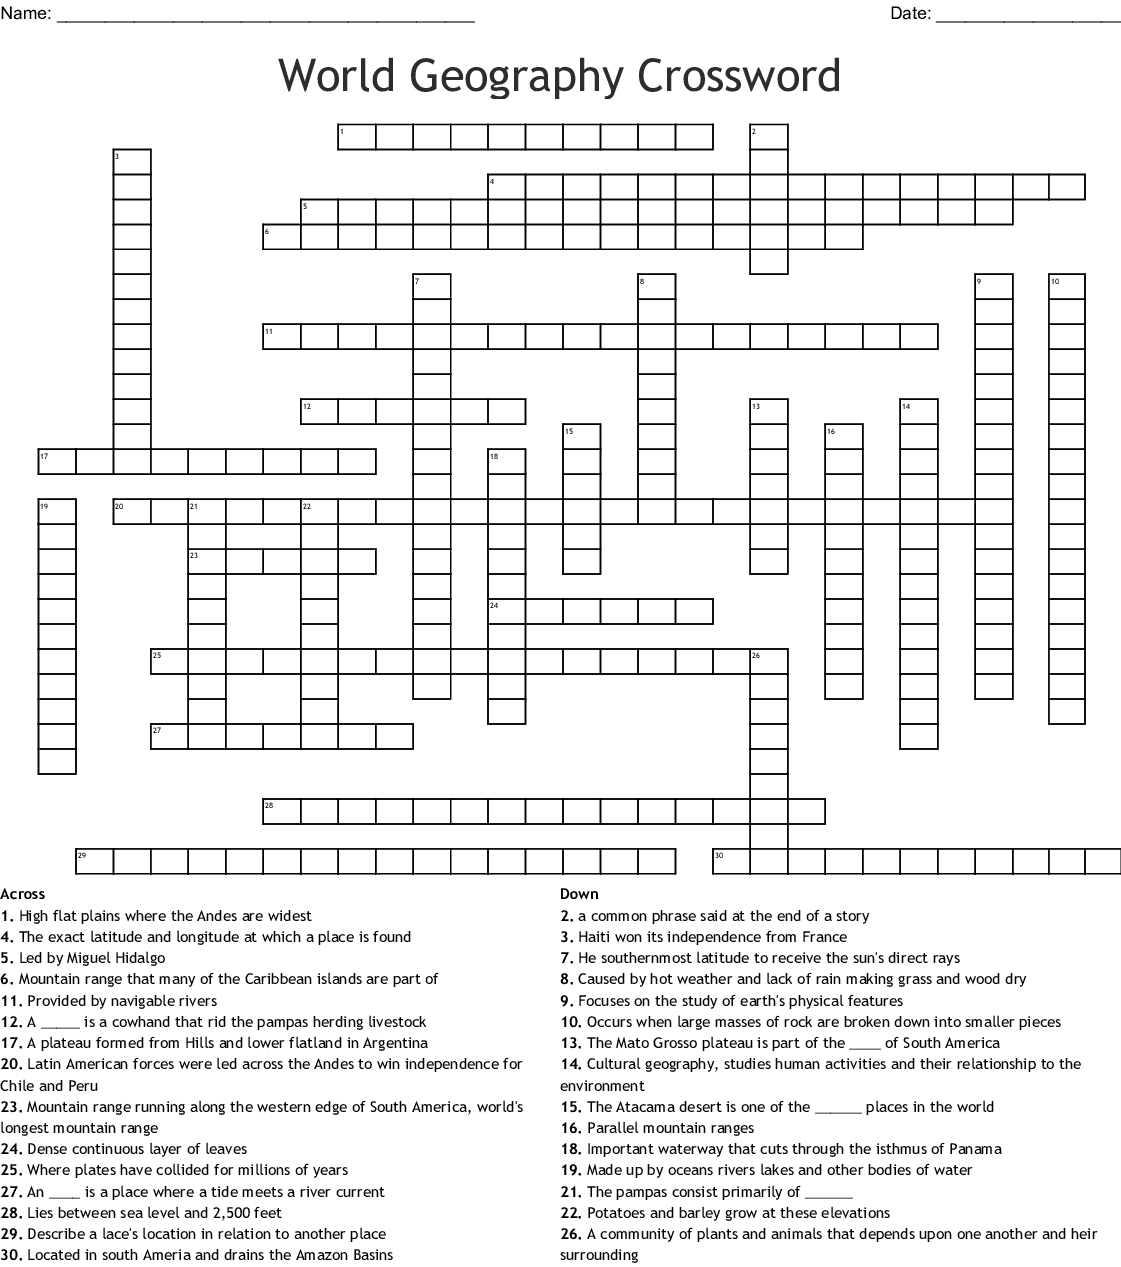 World Geography Crossword - Wordmint - Printable Geography Puzzles